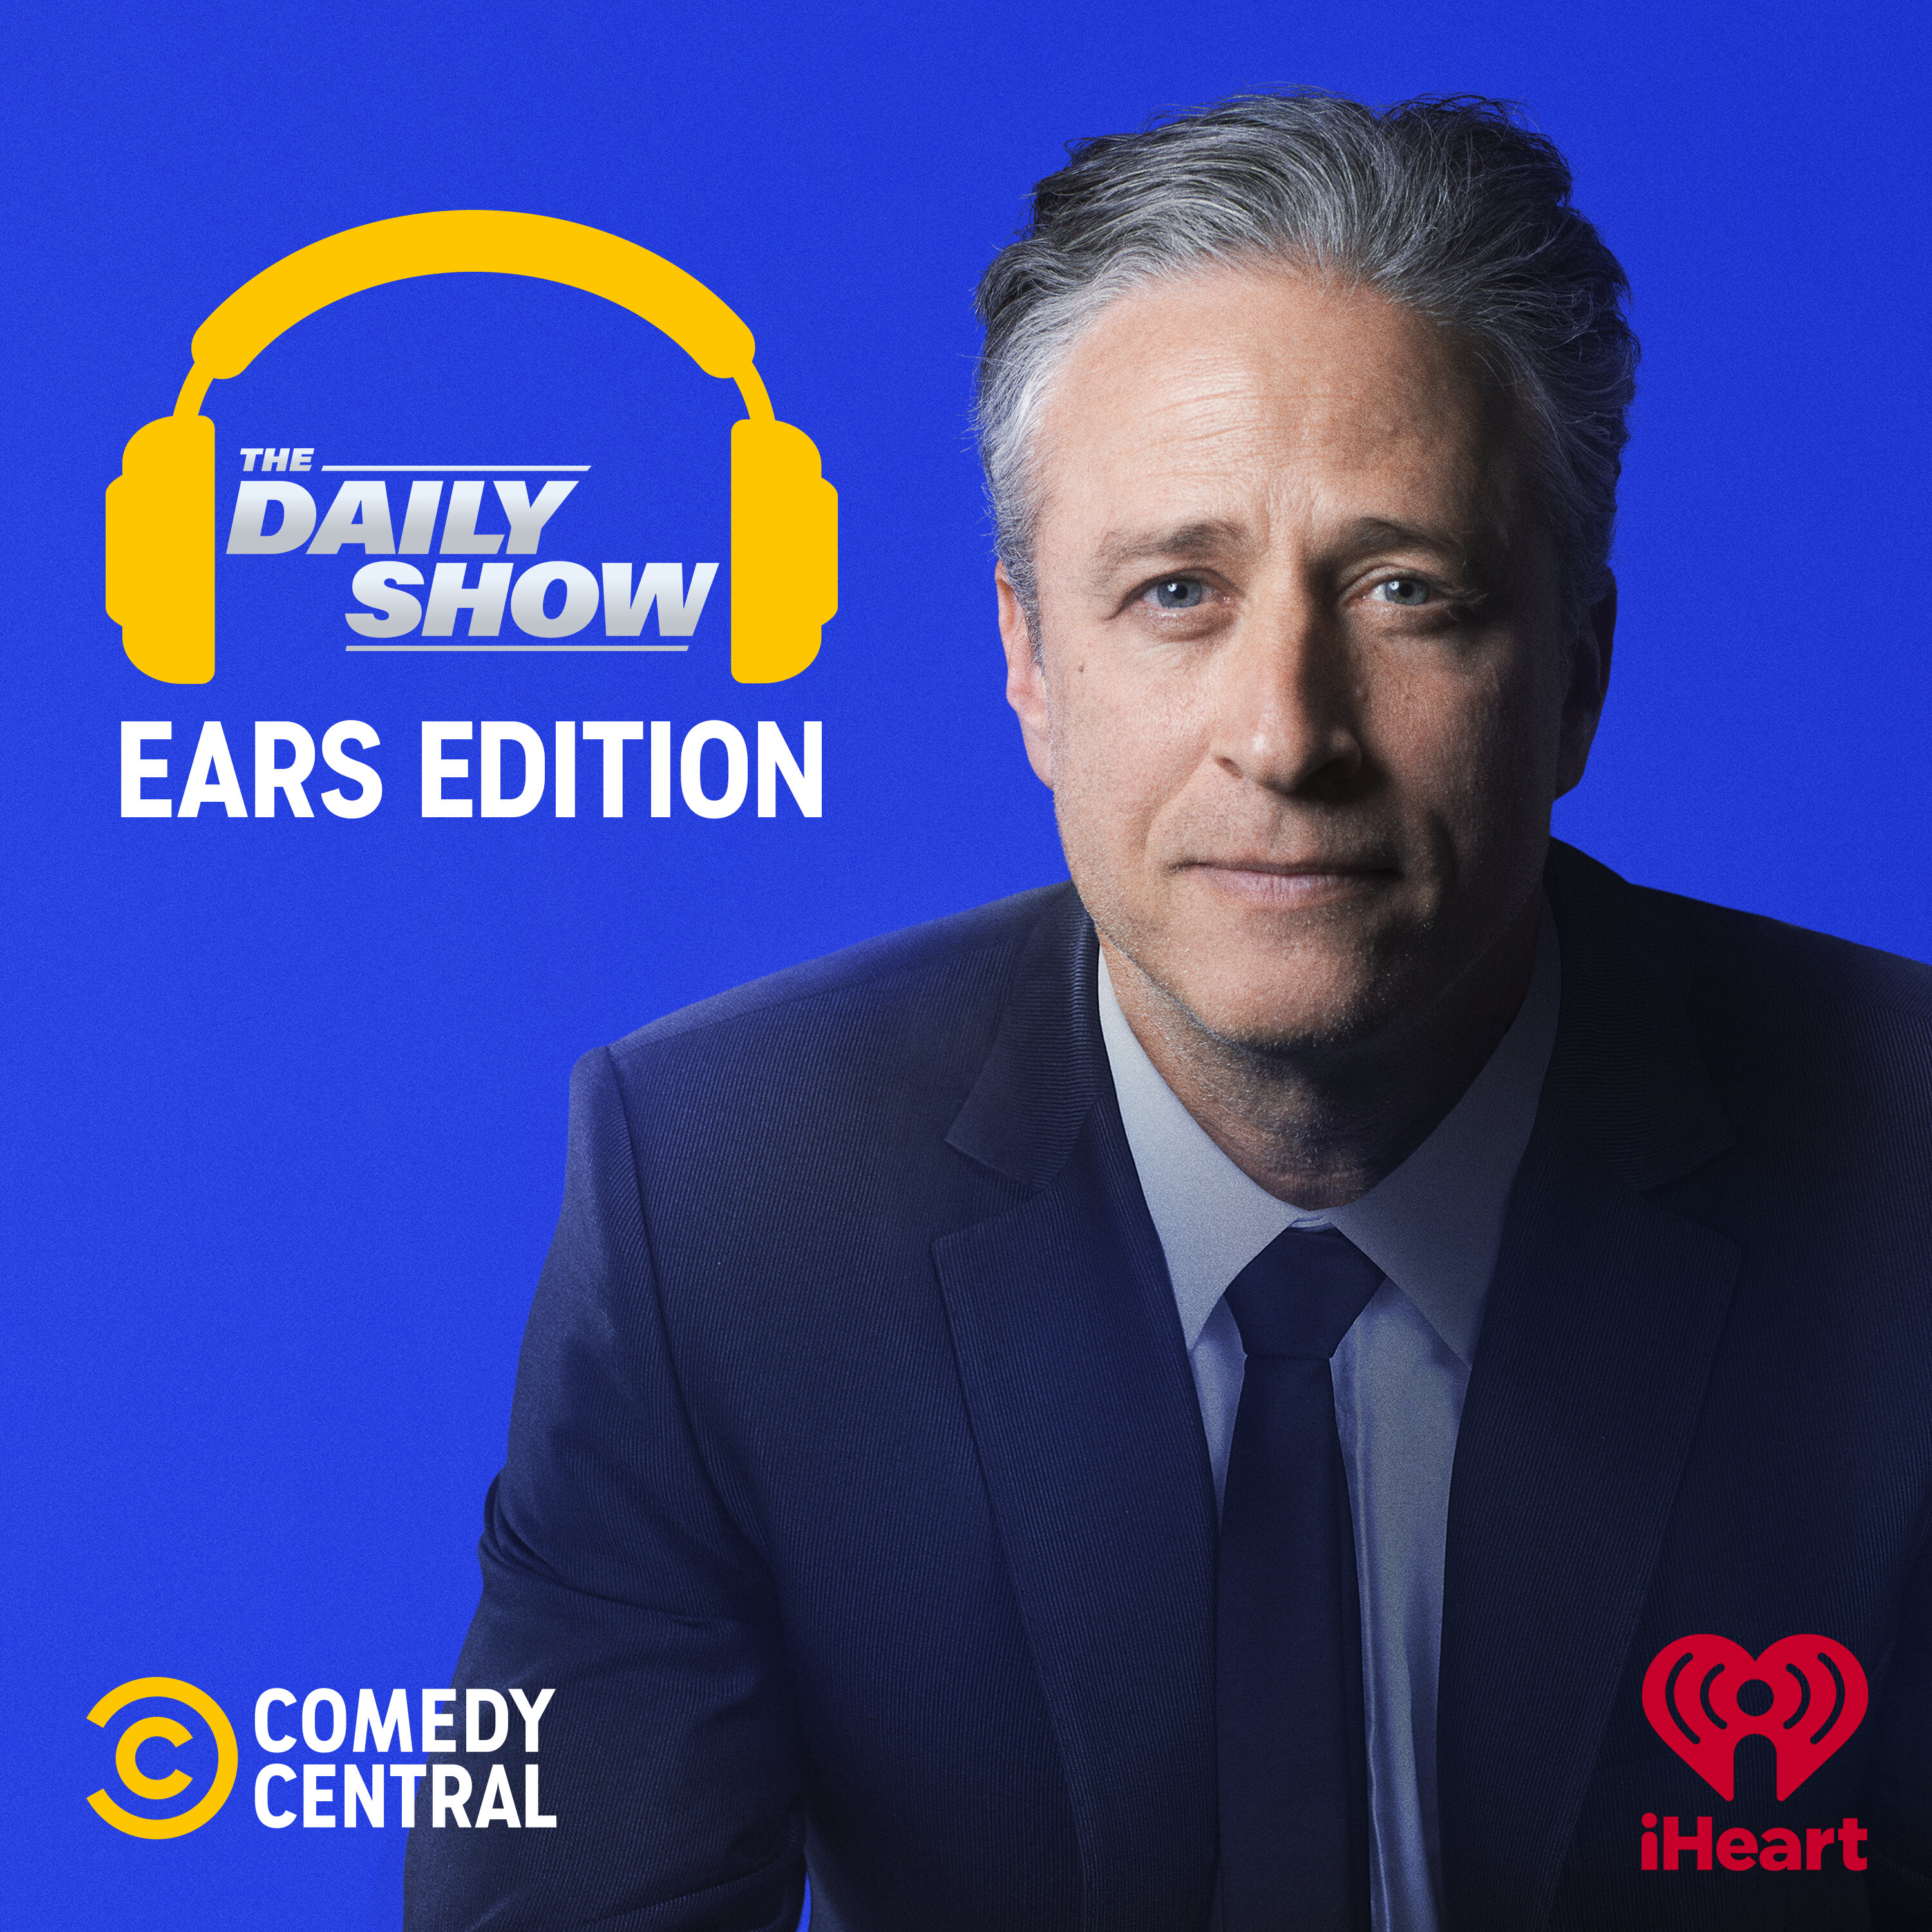 The Daily Show: Ears Edition podcast